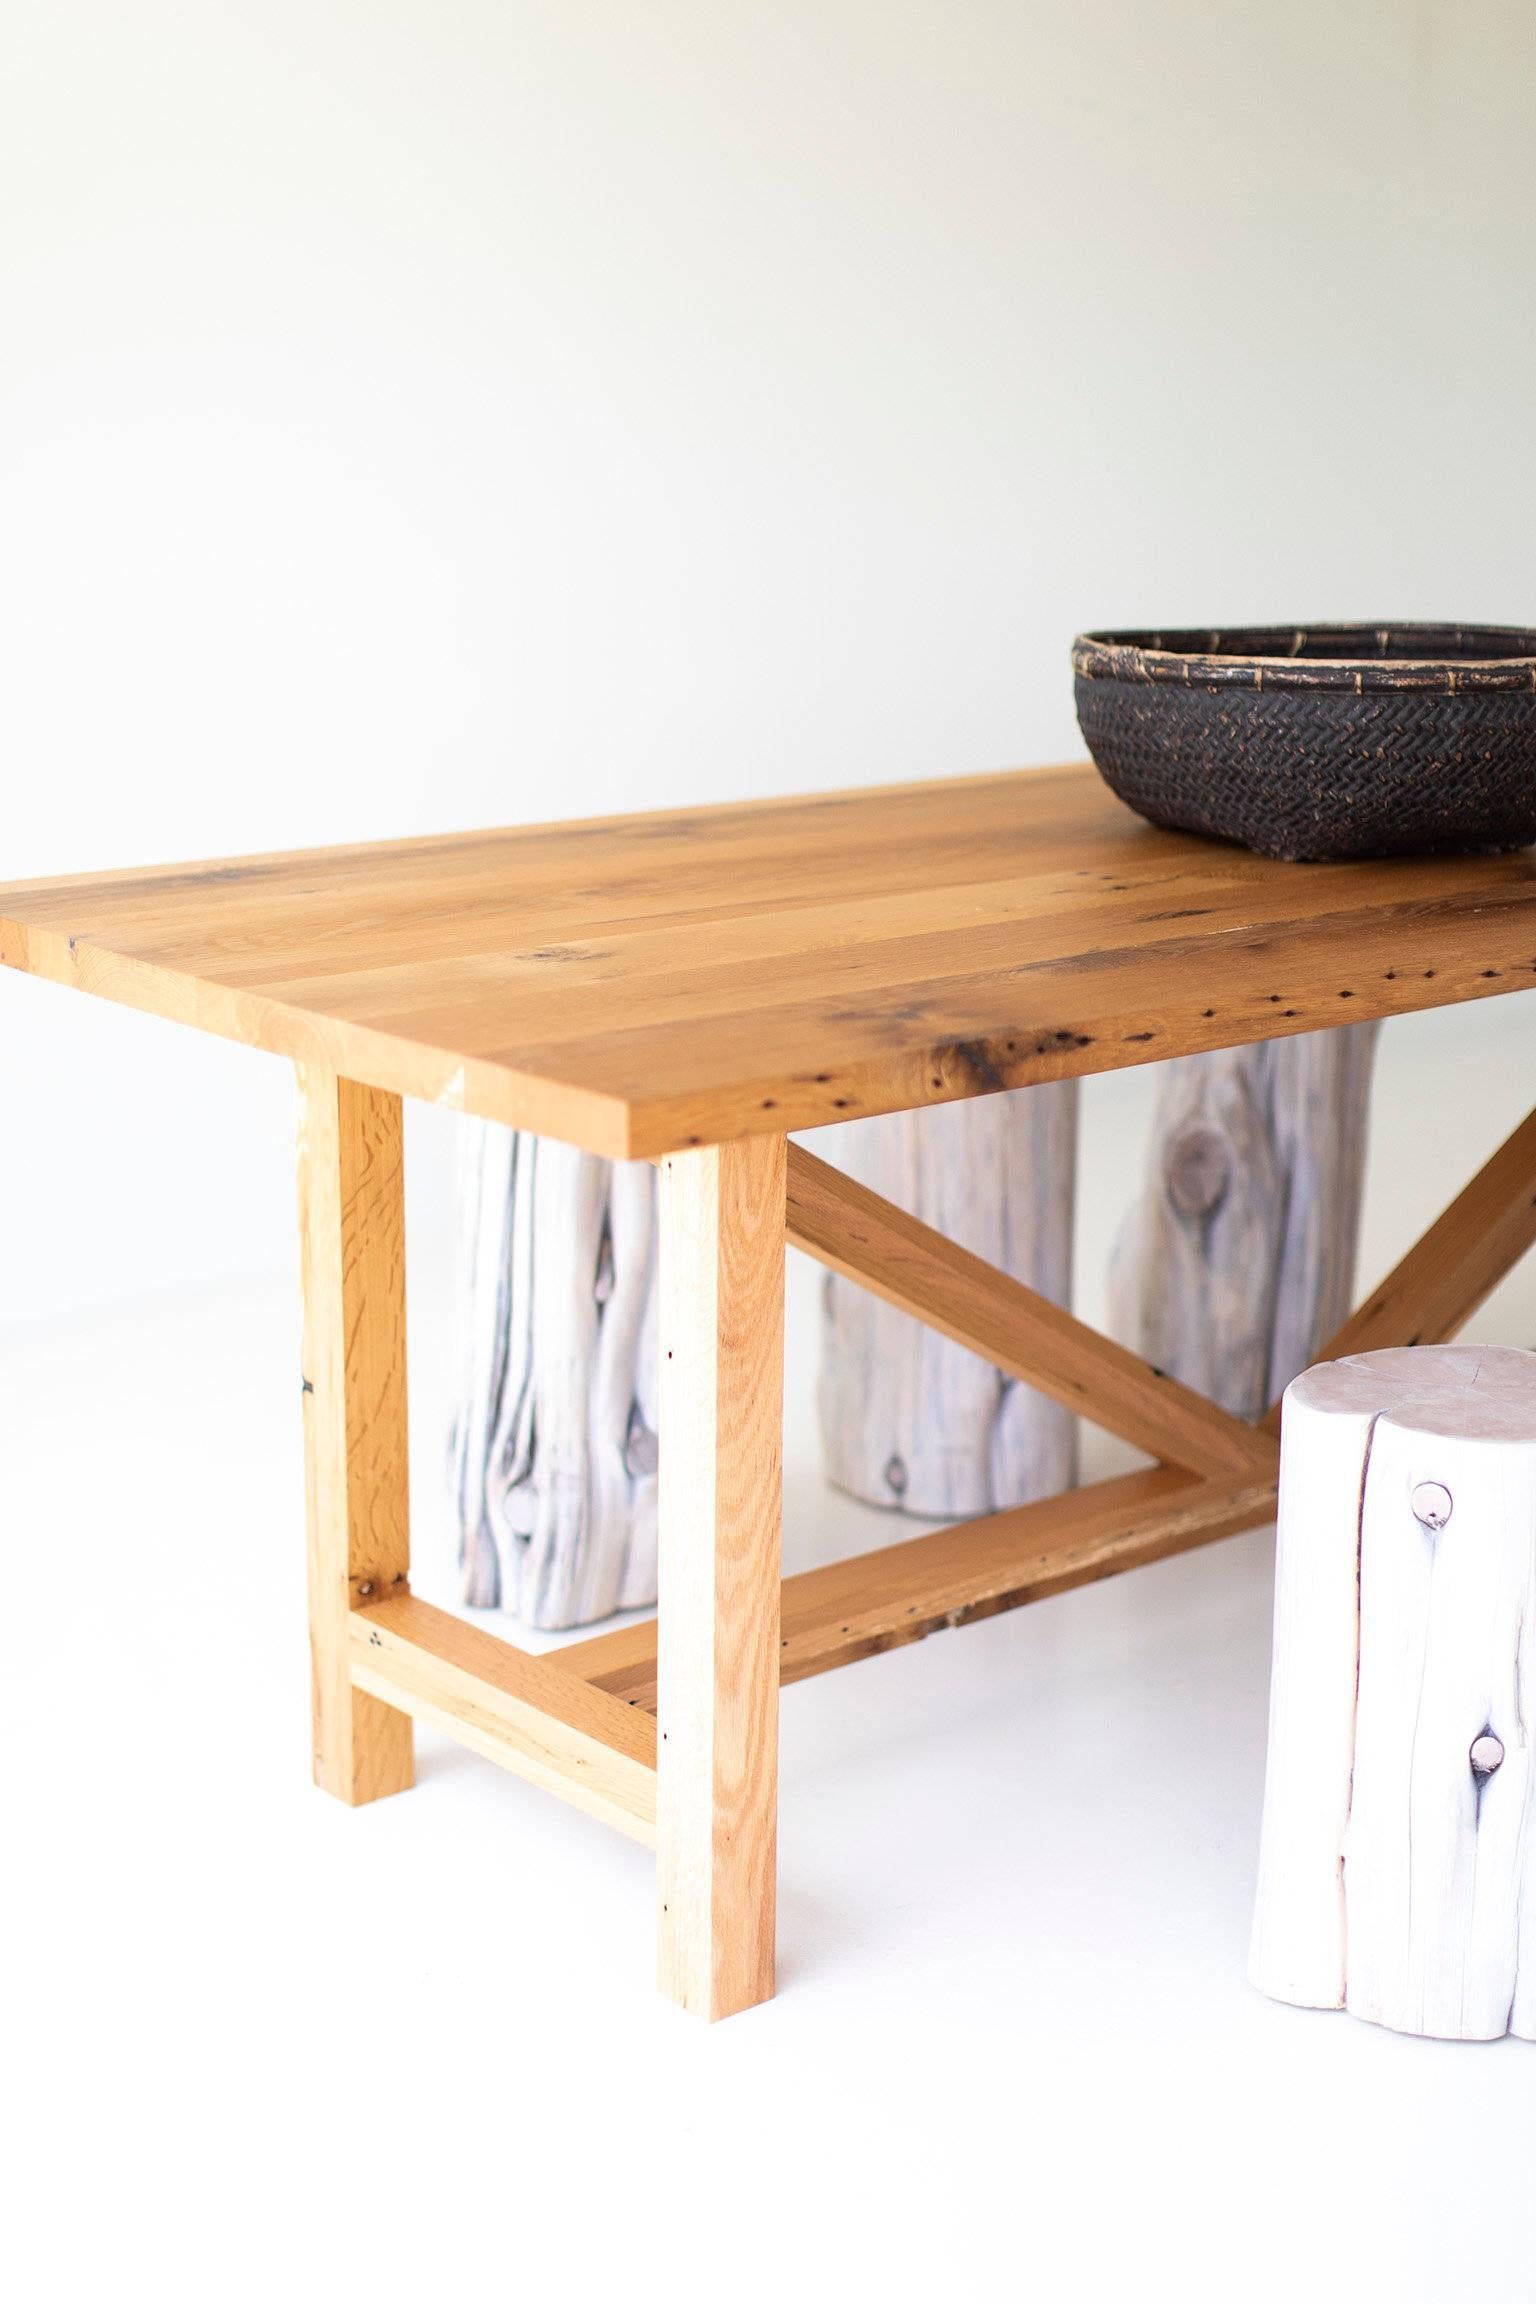 Sorry, we are no longer offering reclaimed oak. If you like this design, please contact us for pricing on other wood species!

Modern farmhouse dining table for Bertu Home.

This reclaimed oak dining table is made in the heart of Ohio with locally